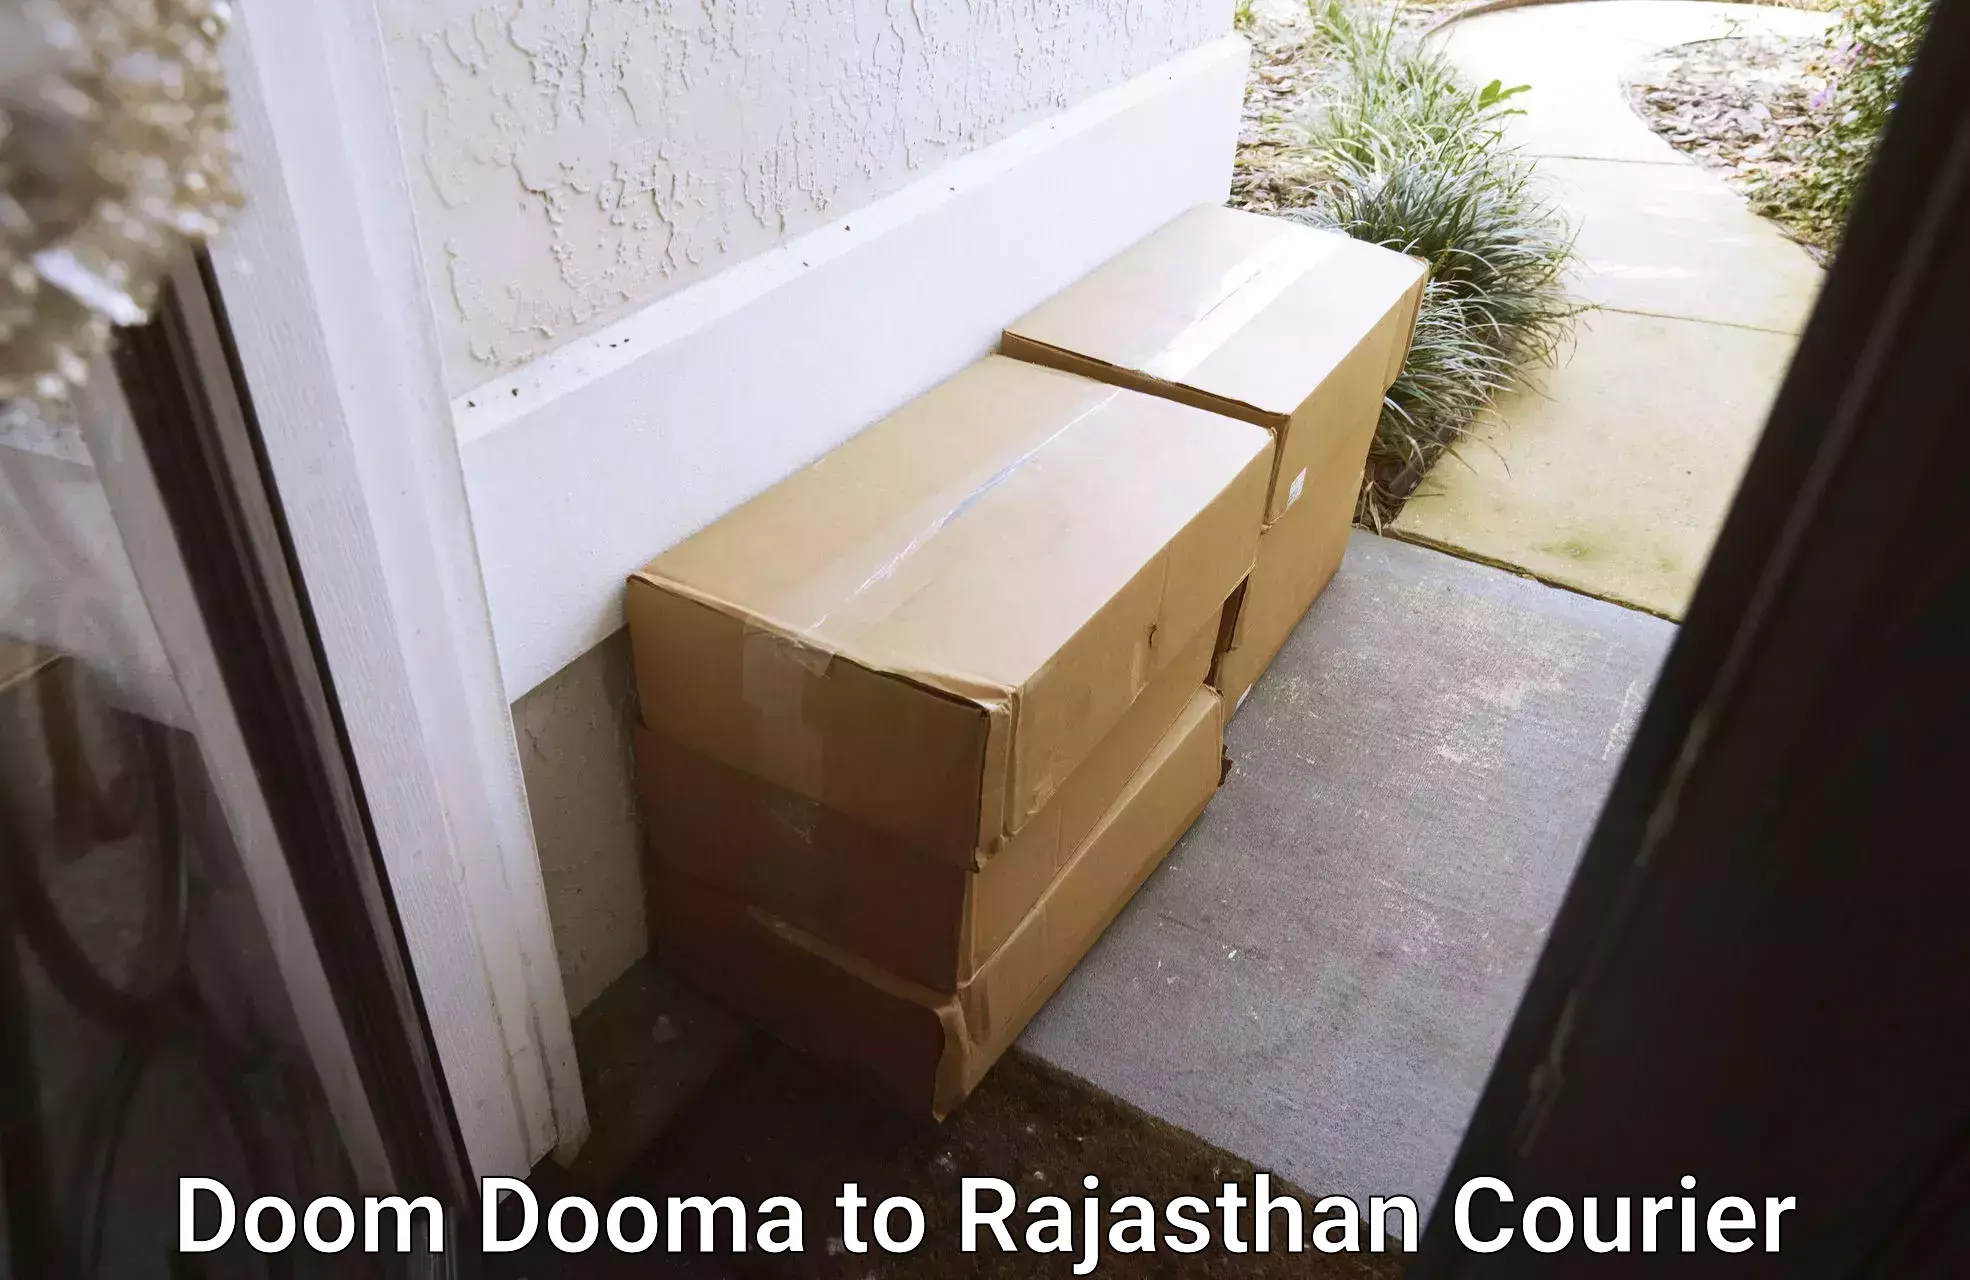 Corporate courier solutions Doom Dooma to Rajasthan